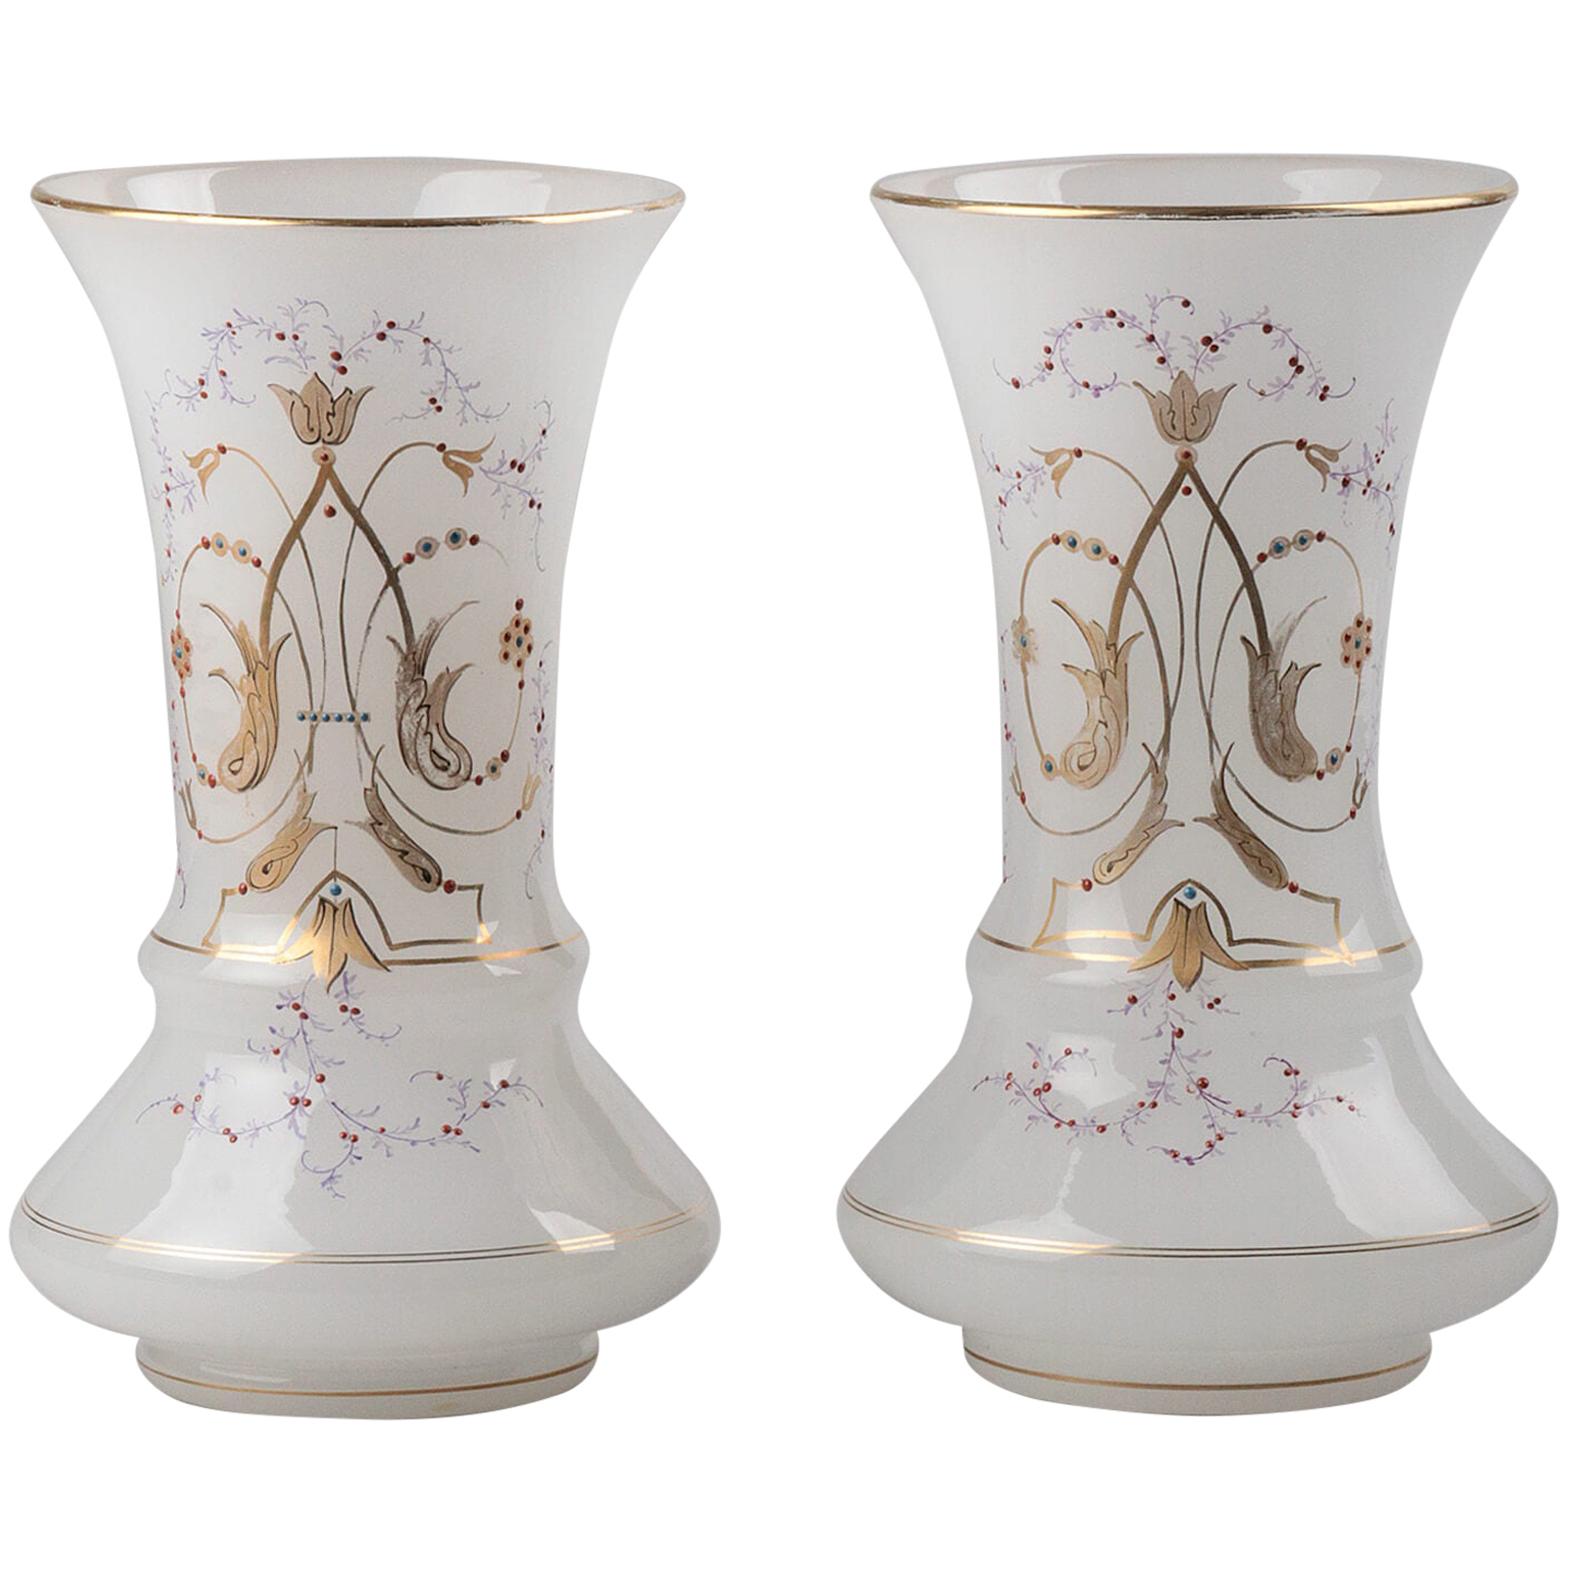 Pair of Victorian Opaline Glass Hand Painted Vases from circa 1880